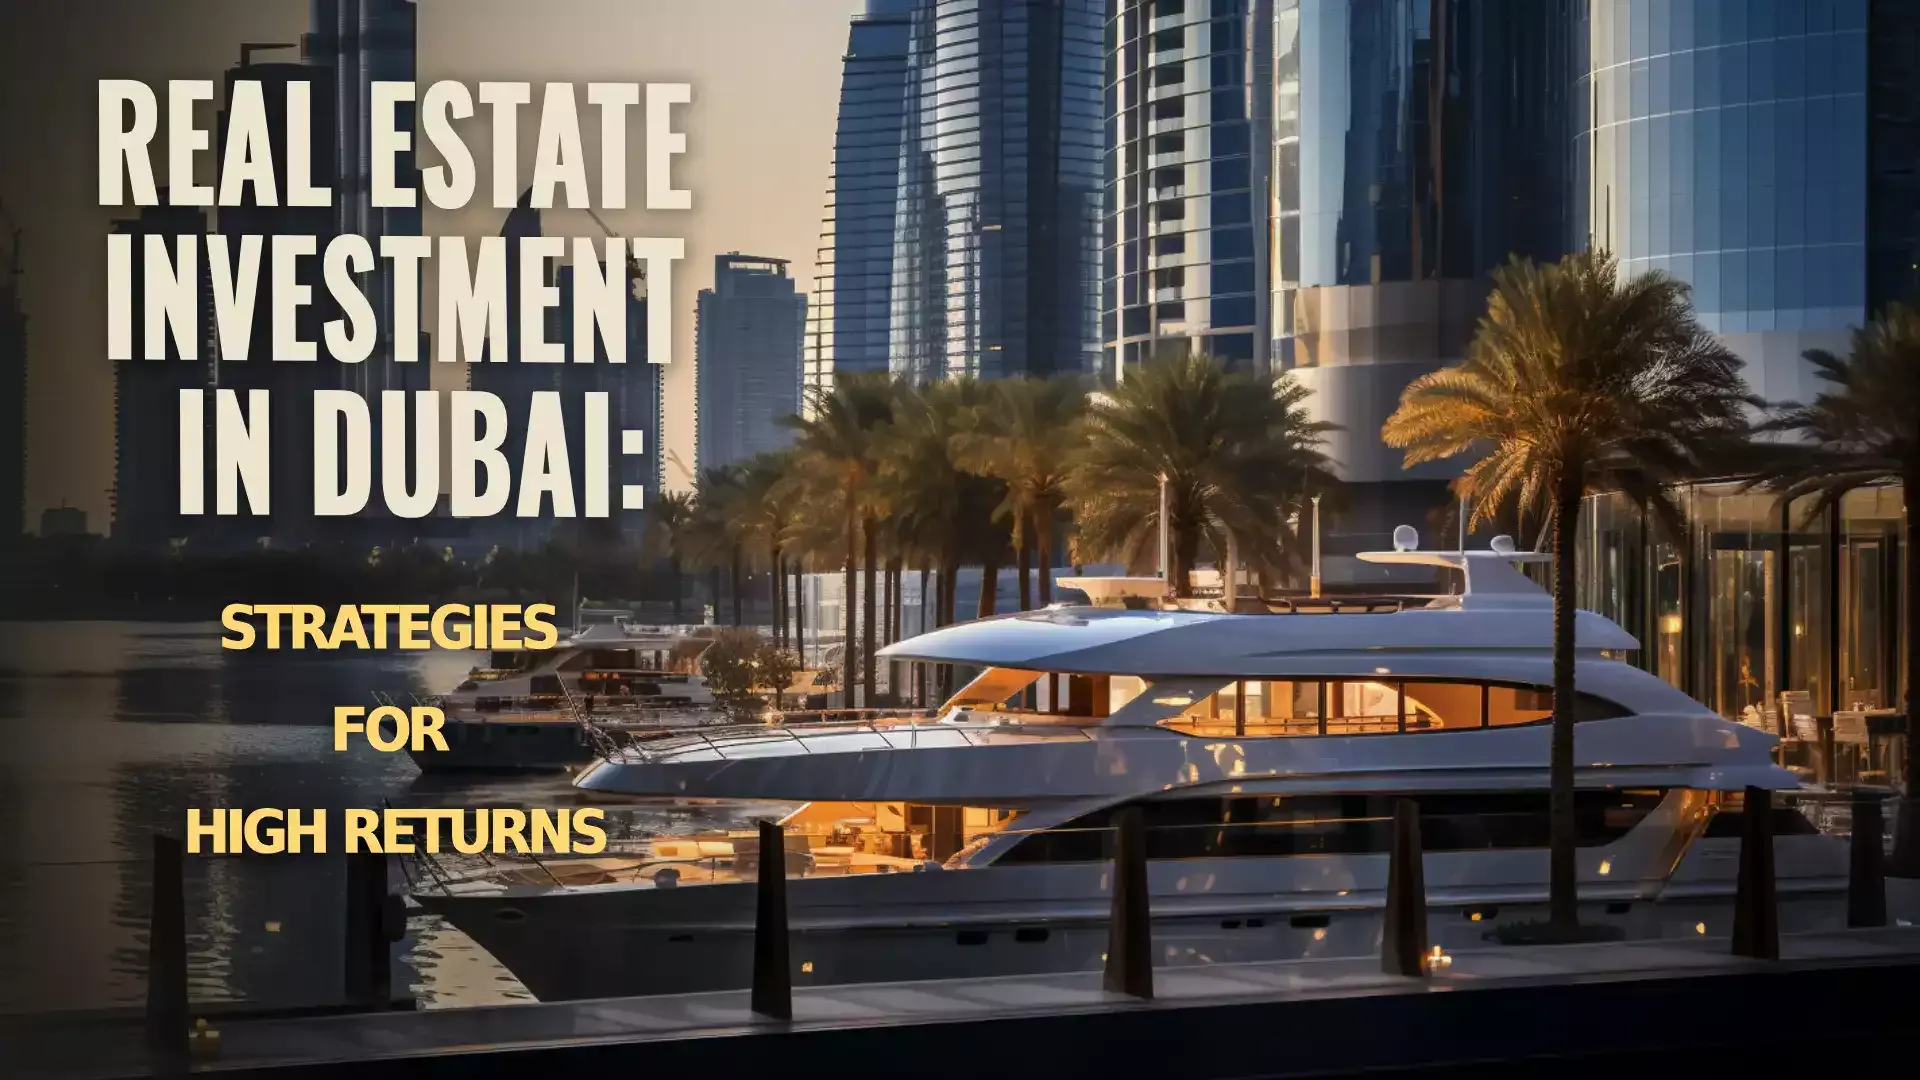 An image depicting potential real estate investments in Dubai